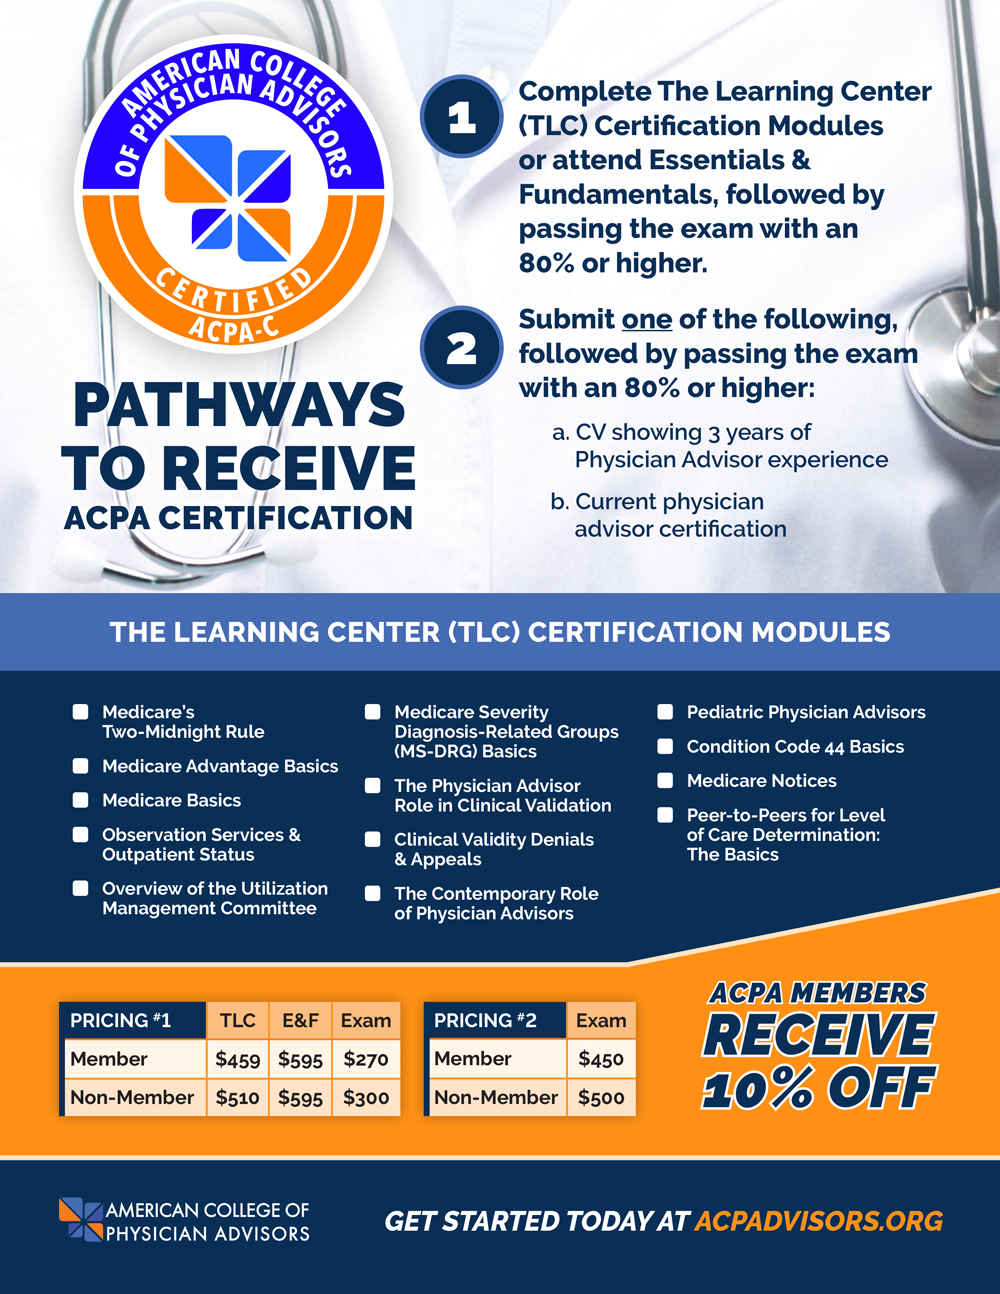 Pathways to Receive ACPA Certification